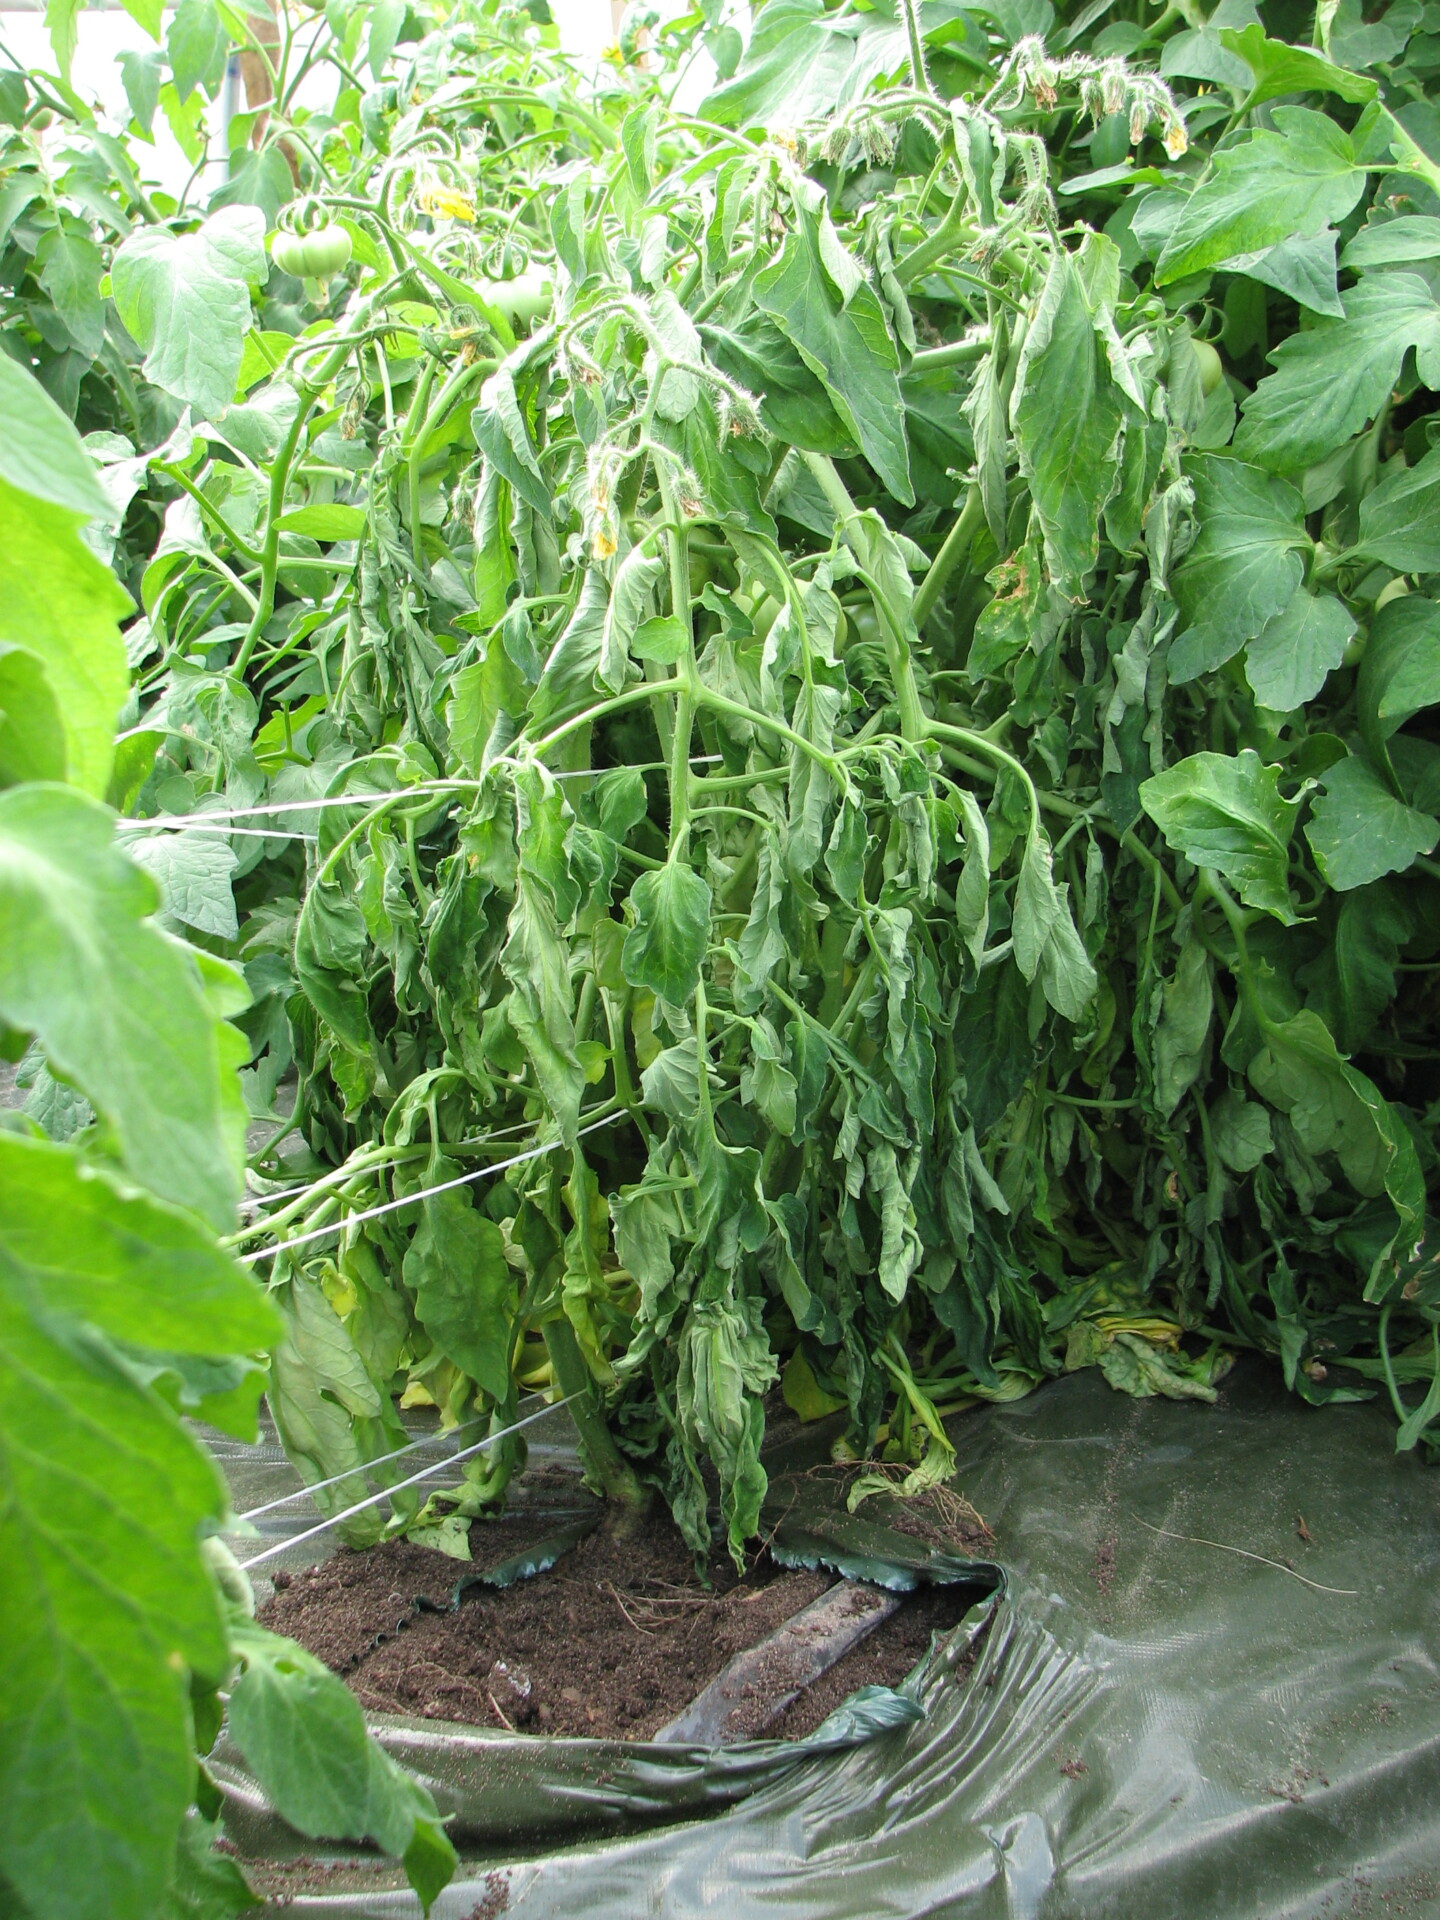 The first symptom of Fusarium crown rot one of tomato is likely to notice is a wilted plant.